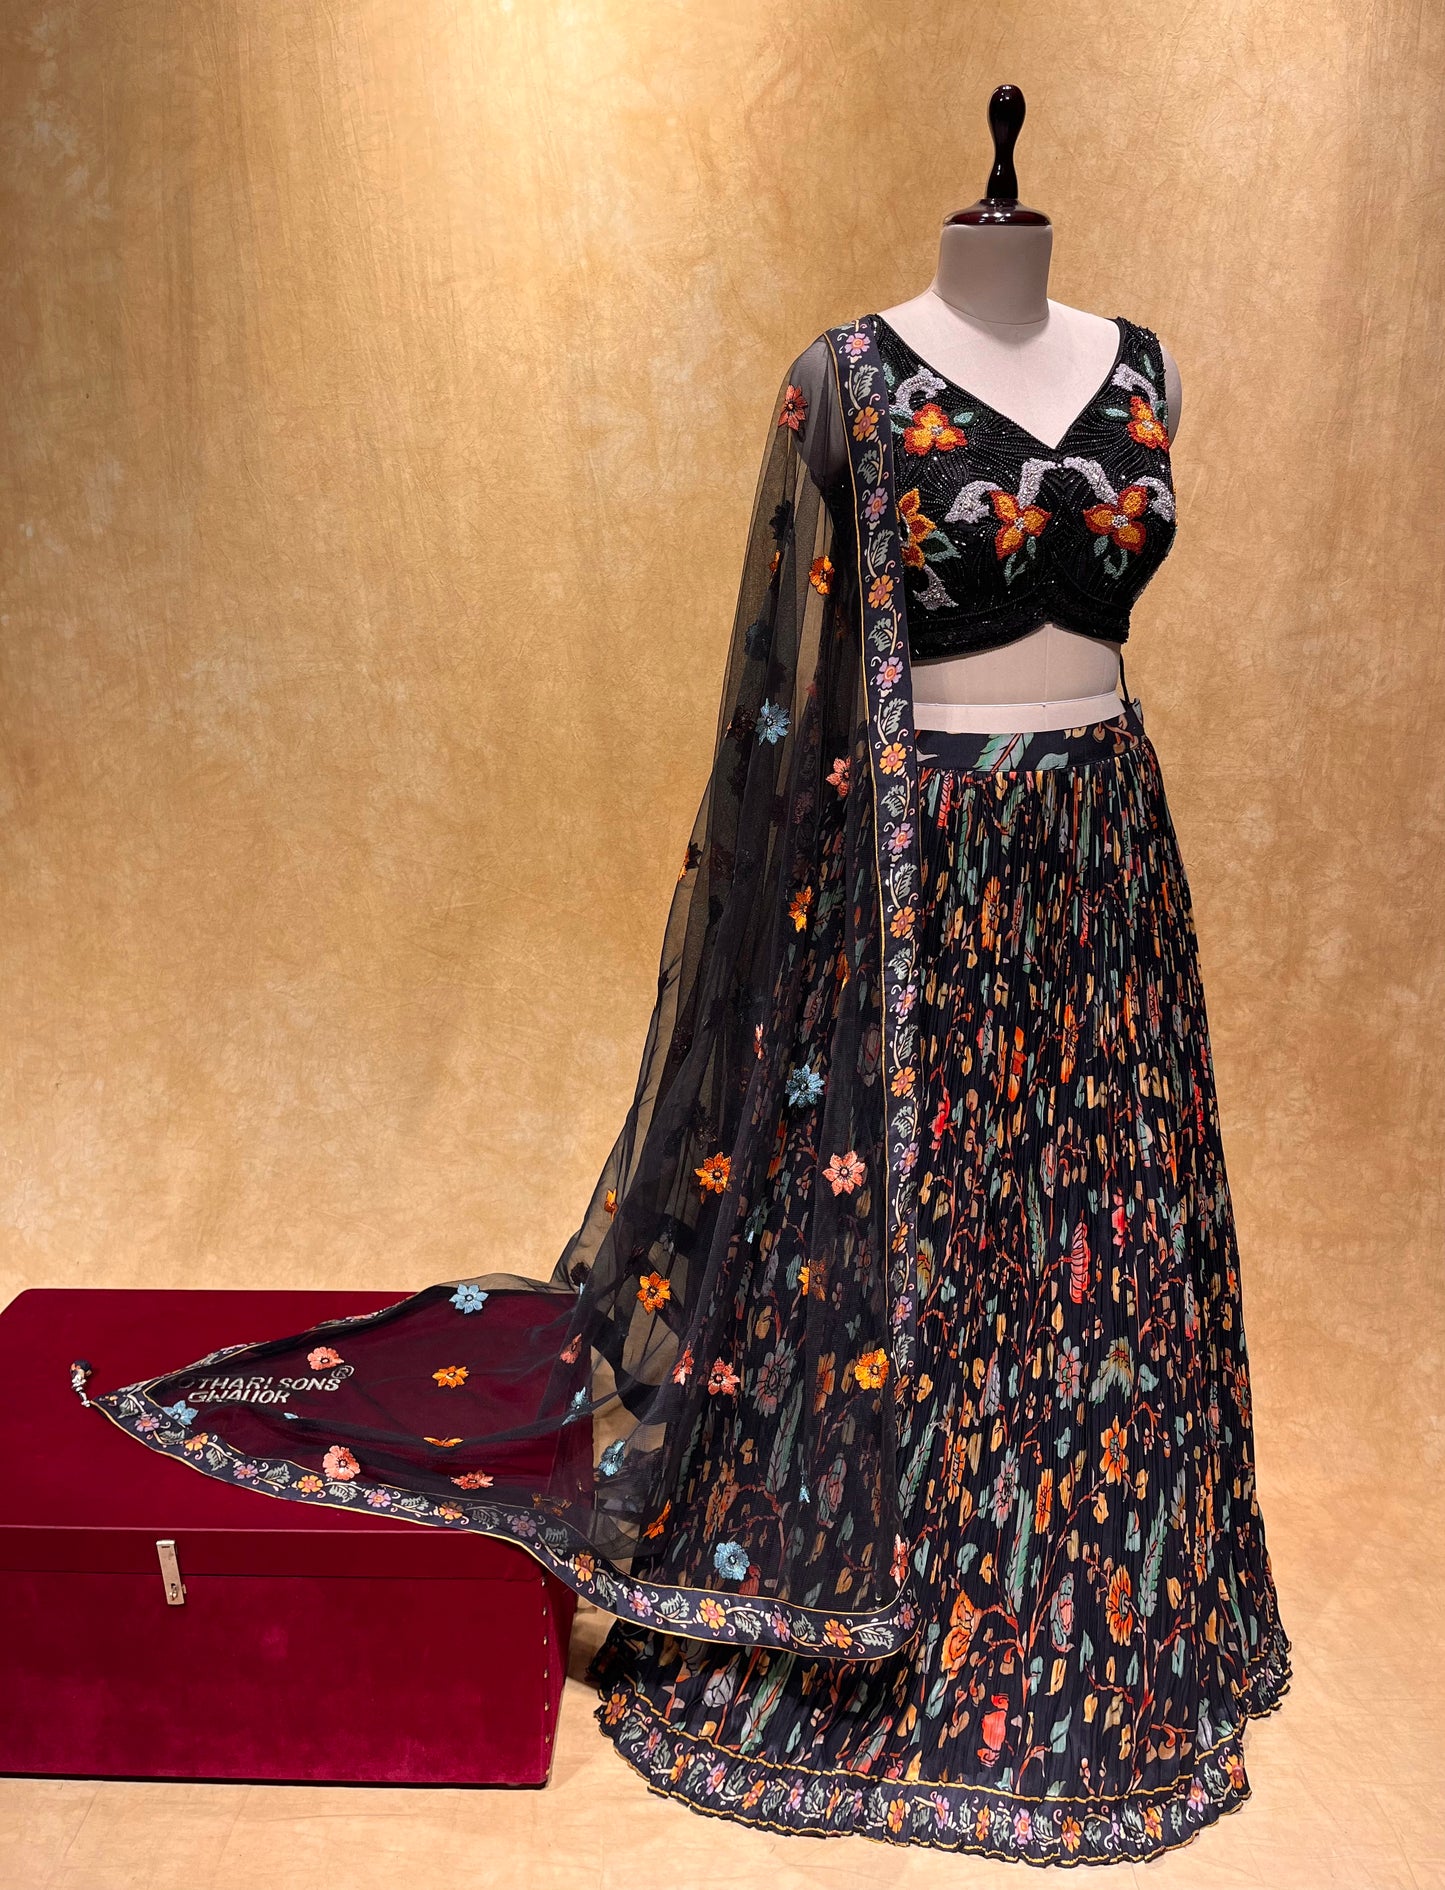 (DELIVERY IN 25 DAYS) BRIDESMAIDS READYMADE BLACK FLORAL PRINTED LEHENGA WITH HAND EMBROIDERED CROP TOP BLOUSE & NET DUPATTA EMBELLISHED WITH CUTDANA, BEADS & RESHAM EMBROIDERY